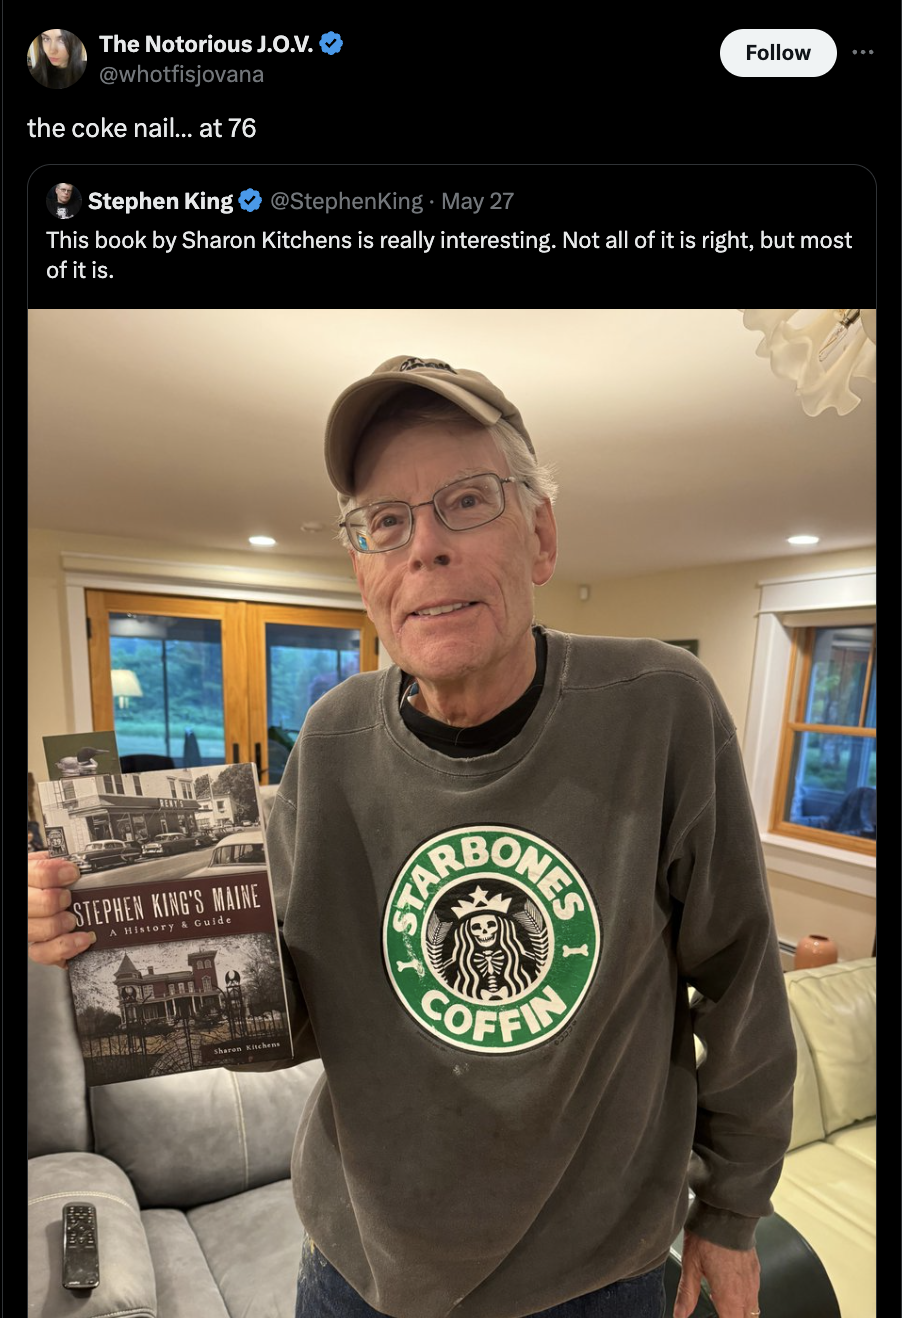 screenshot - The Notorious J.O.V. the coke nail... at 76 Stephen King StephenKing May 27 This book by Sharon Kitchens is really interesting. Not all of it is right, but most of it is. Stephen King'S Maine Arbones St Coffin I